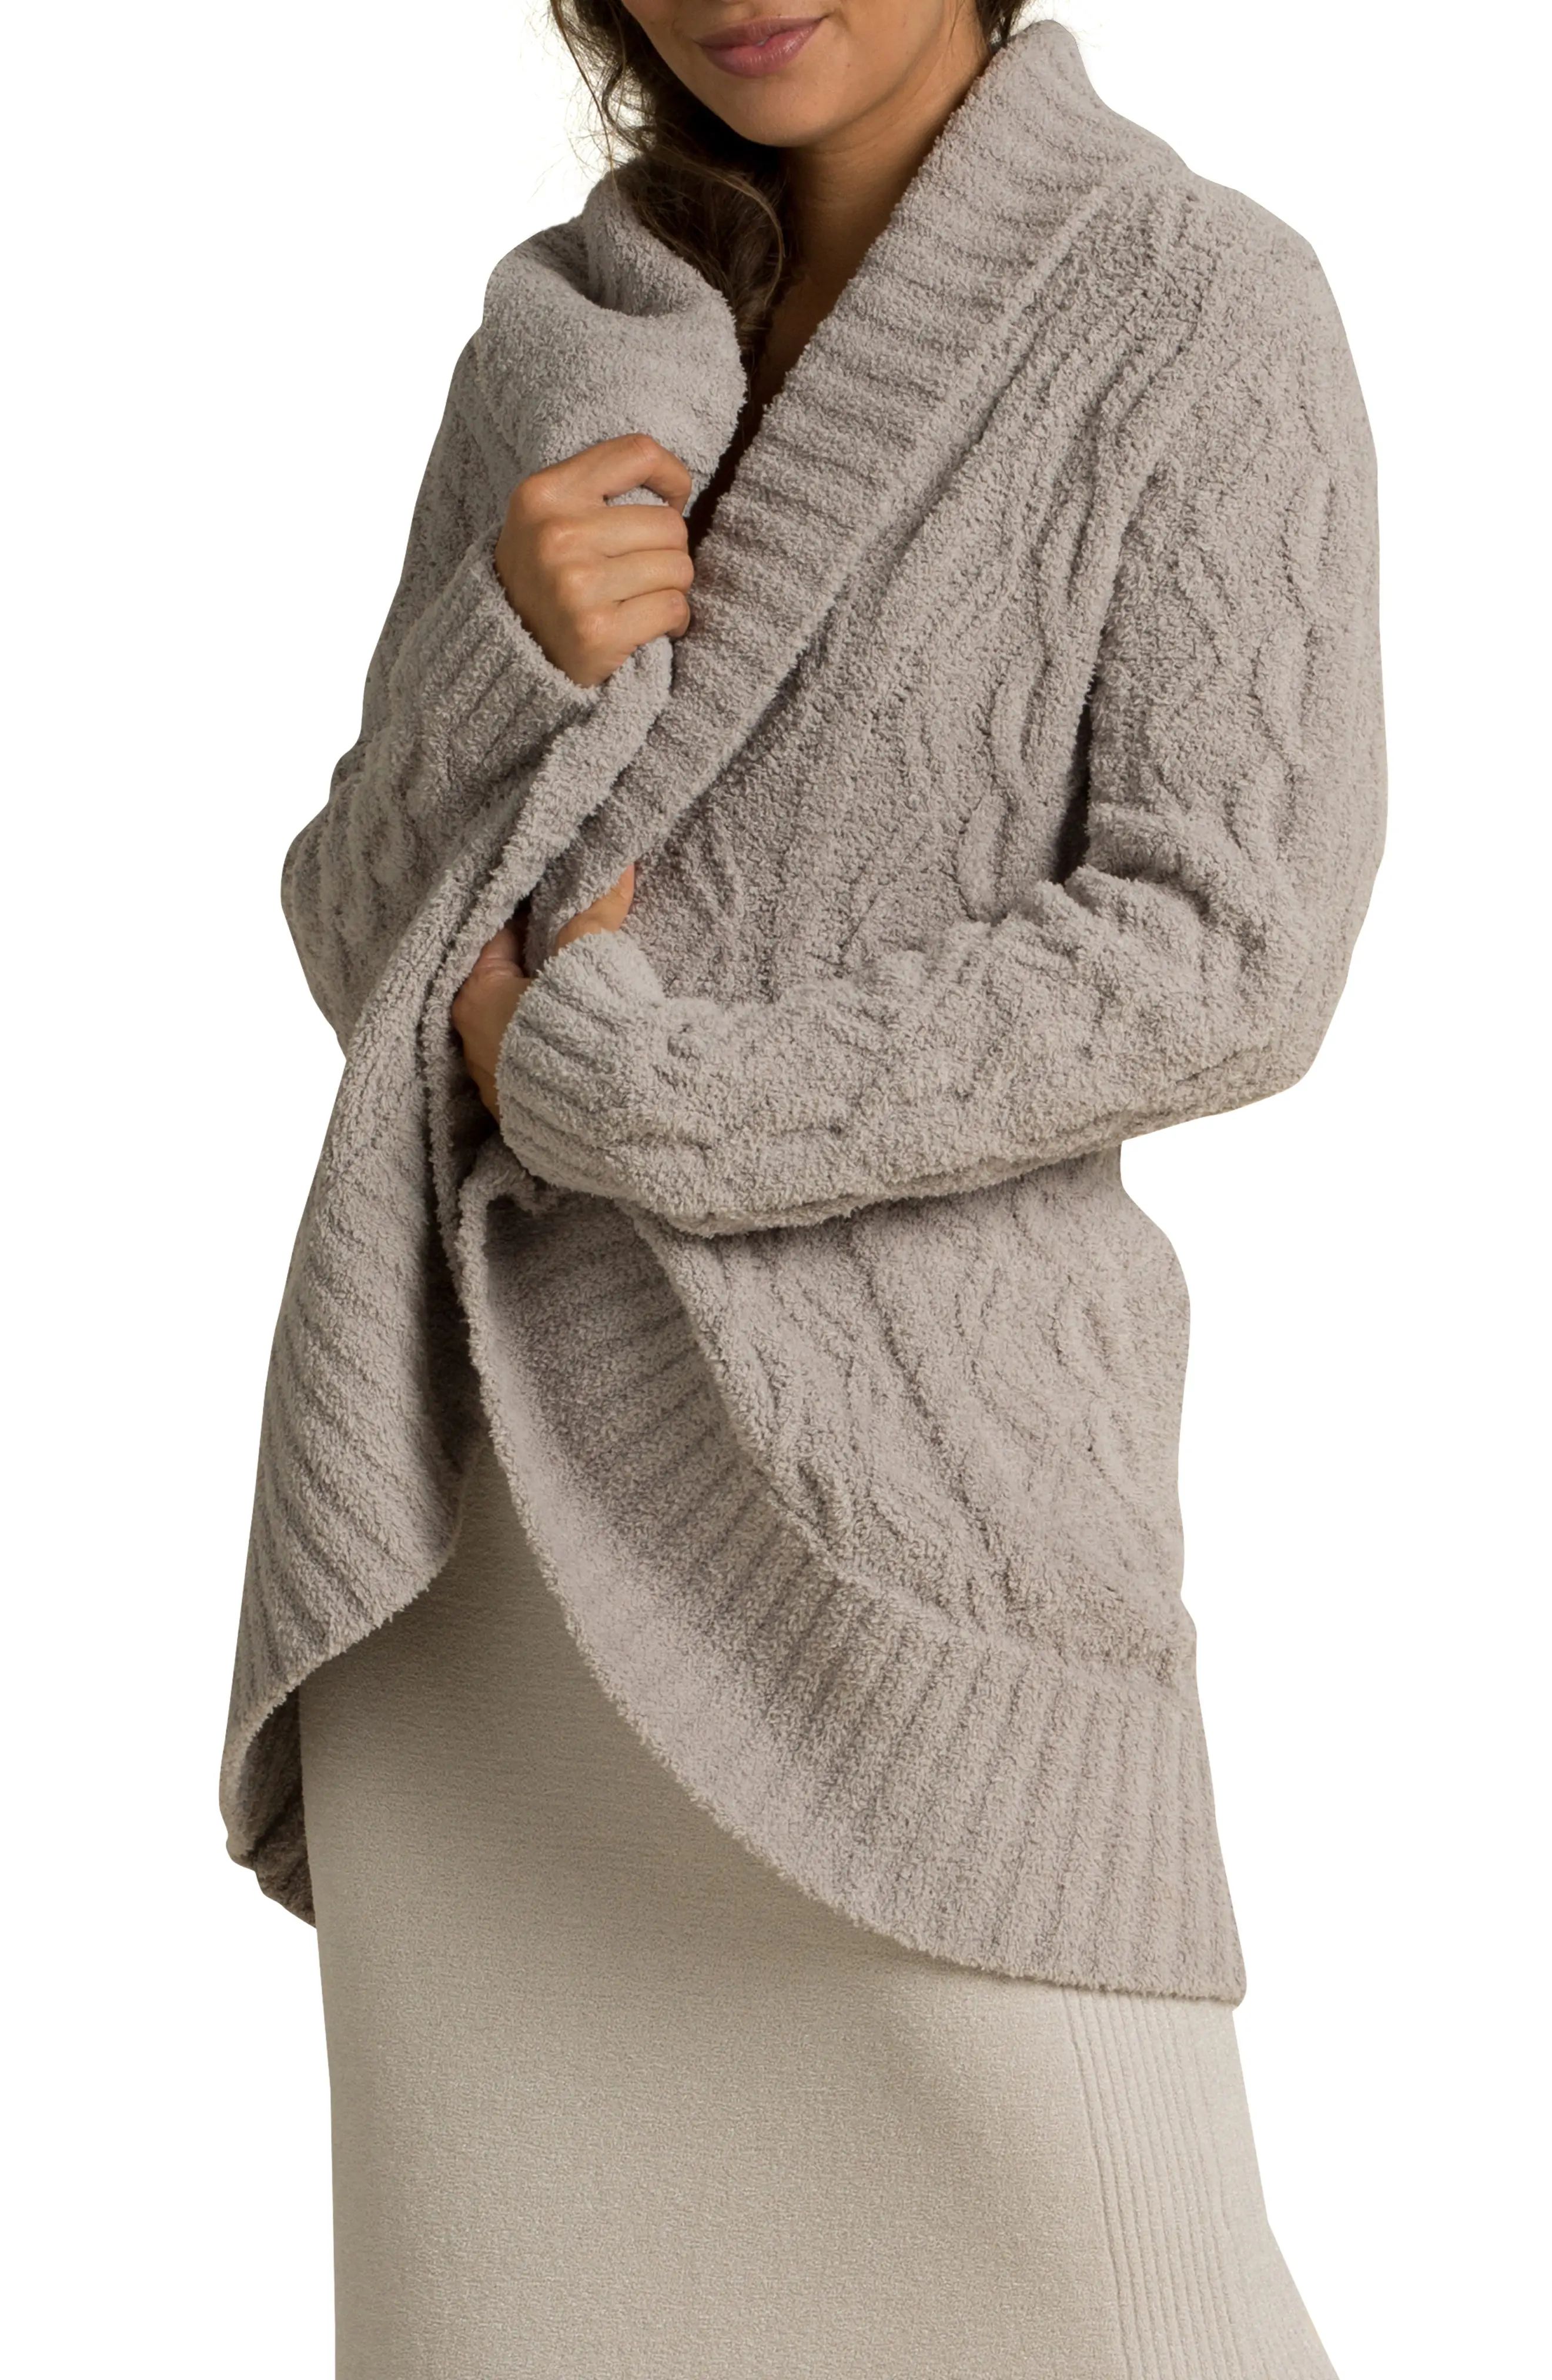 Barefoot Dreams(R) CozyChic(TM) Cable Knit Shawl Collar Cardigan in Linen at Nordstrom, Size Medium | Nordstrom